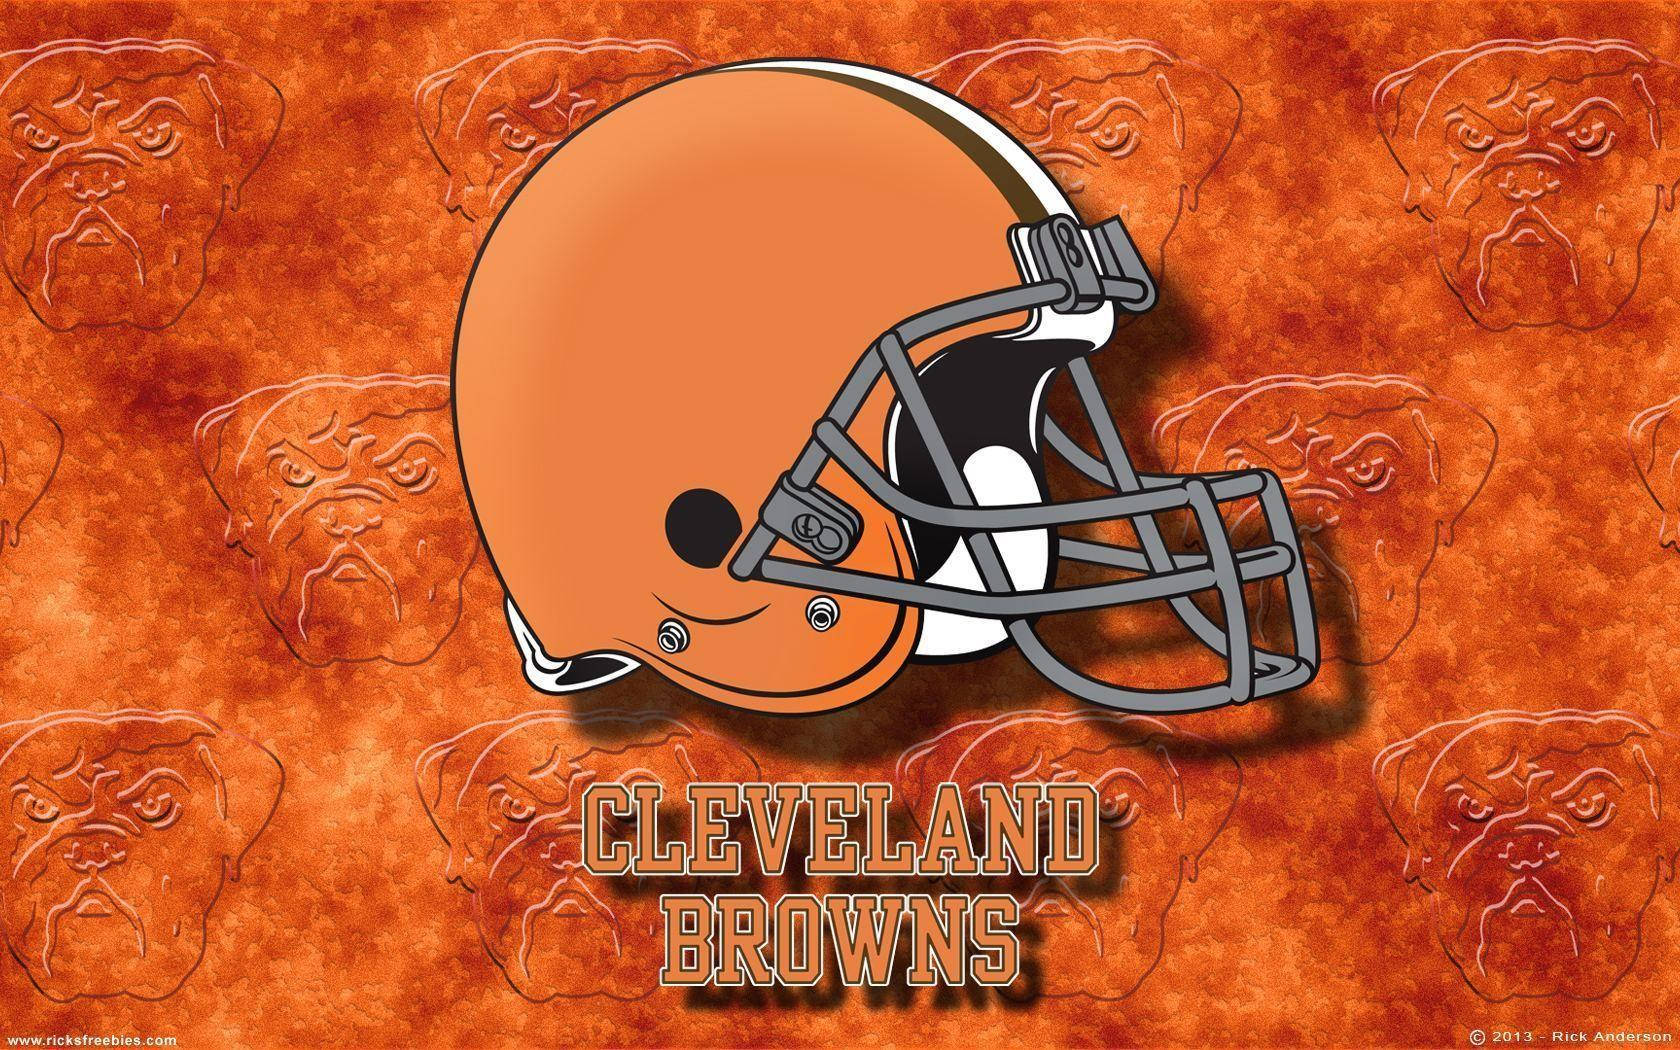 American Football Team Cleveland Browns